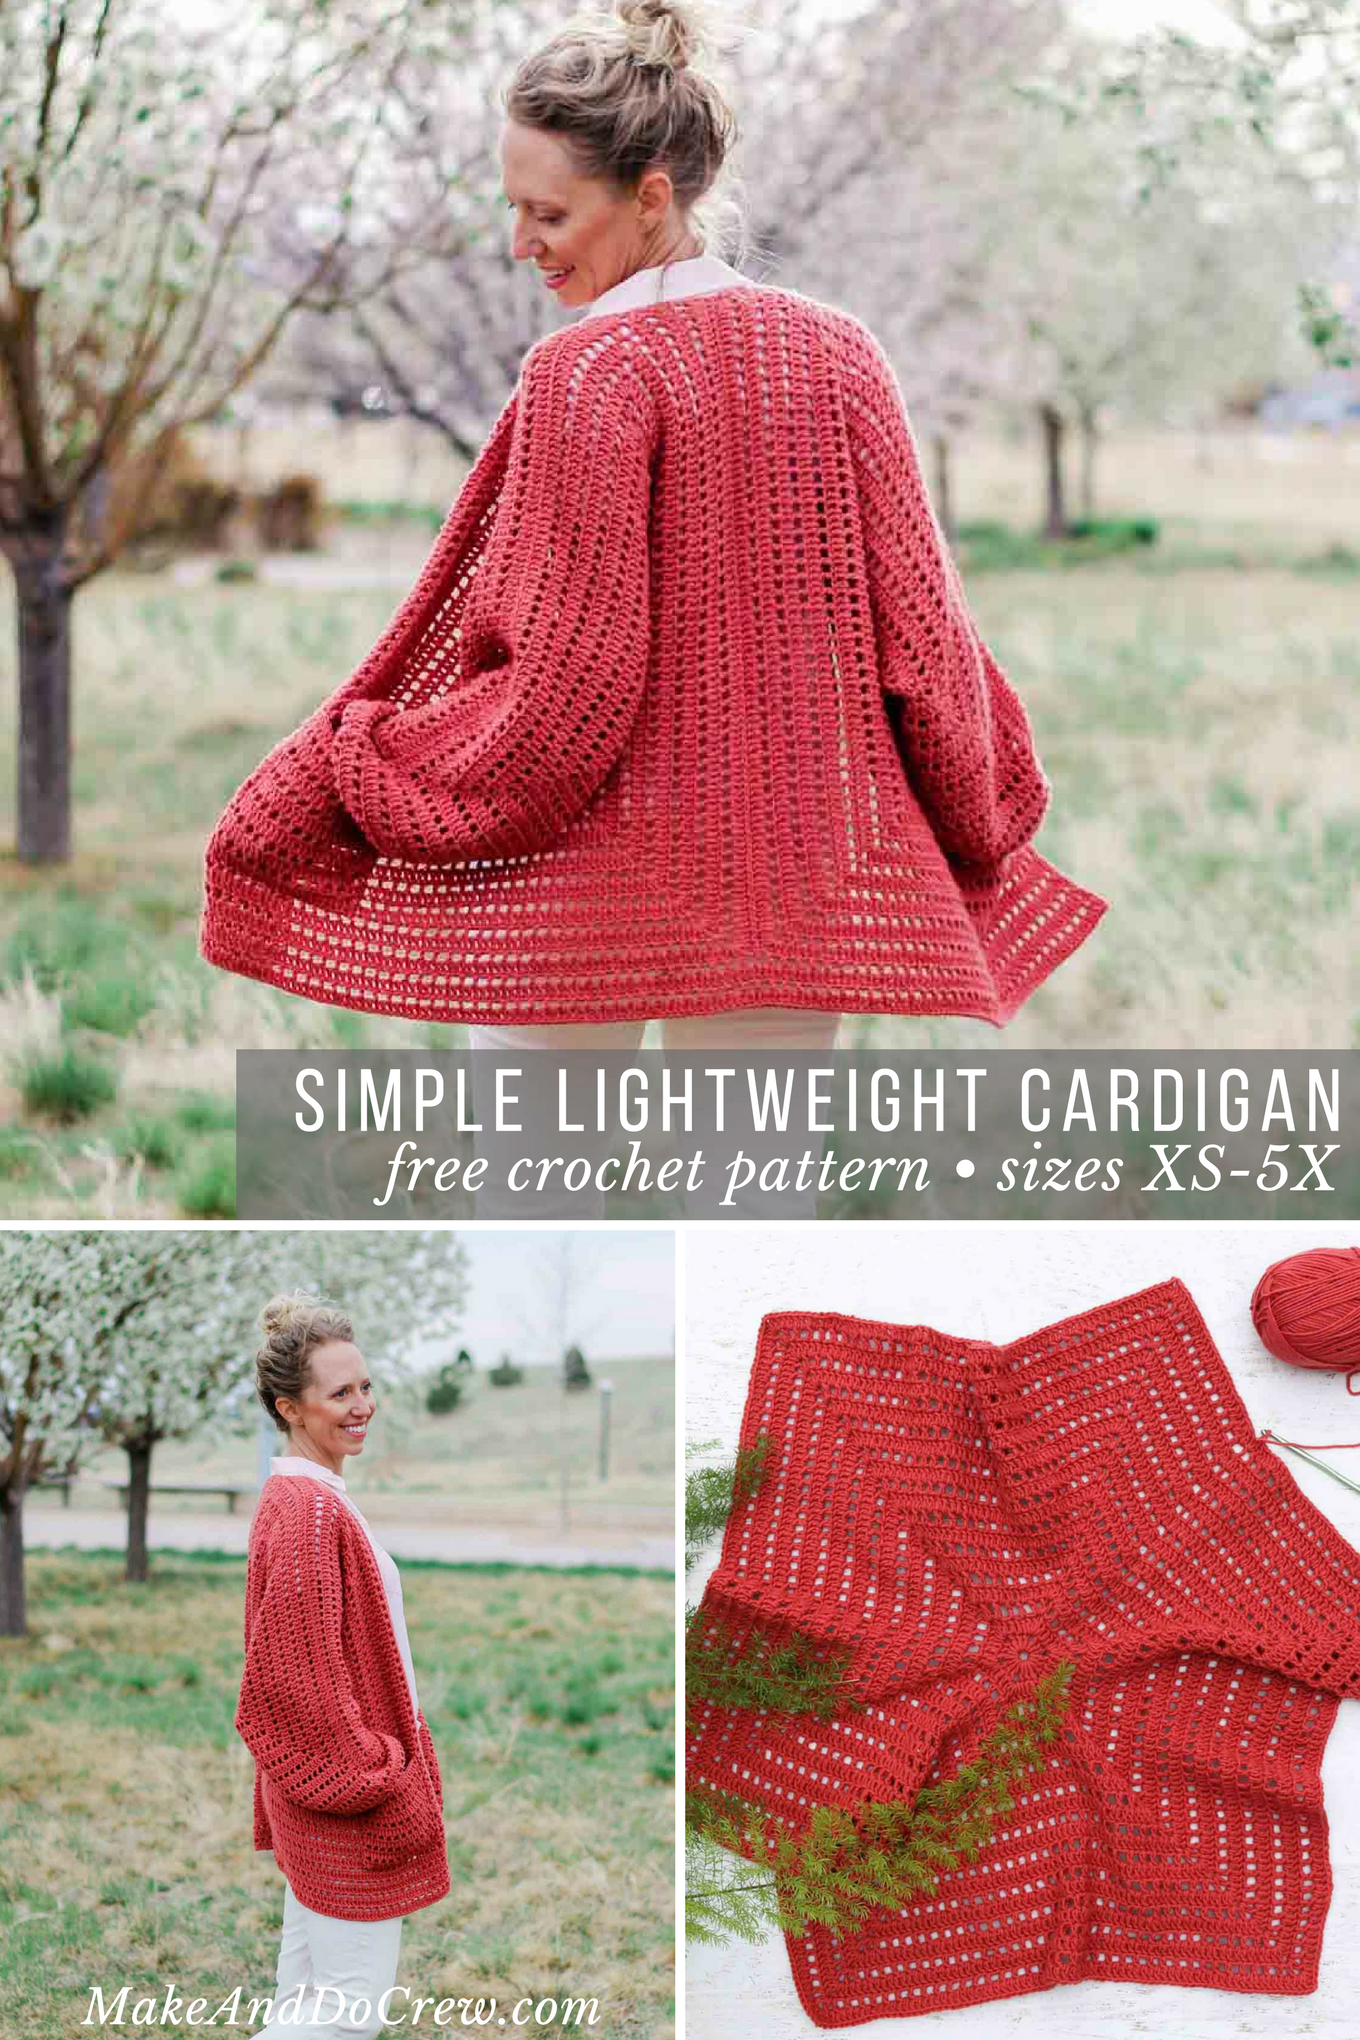 Plus Size Crochet Patterns Free Easy Crochet Sweater Pattern A Cardigan Made From 2 Hexagons